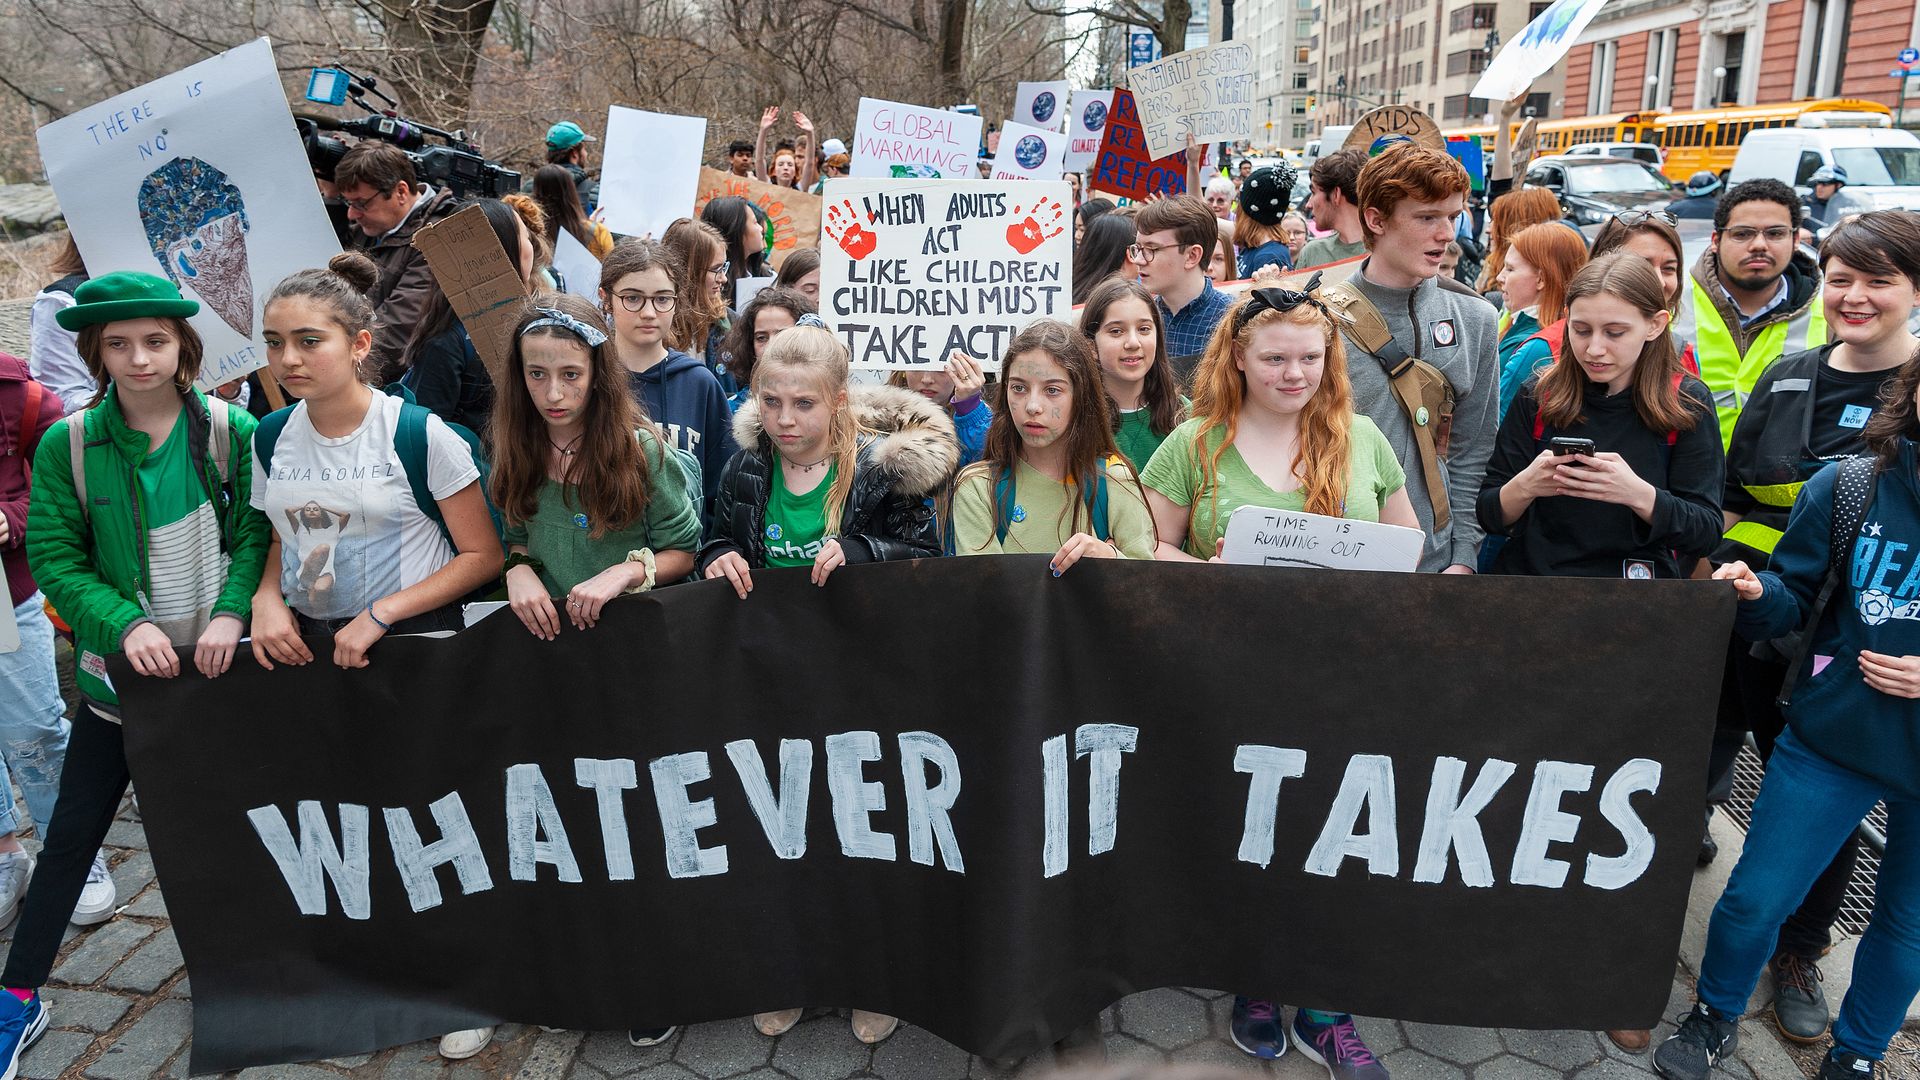  New York City high school students joined their international counterparts to protest climate change and the failure of older generations to address the destruction of the planet.